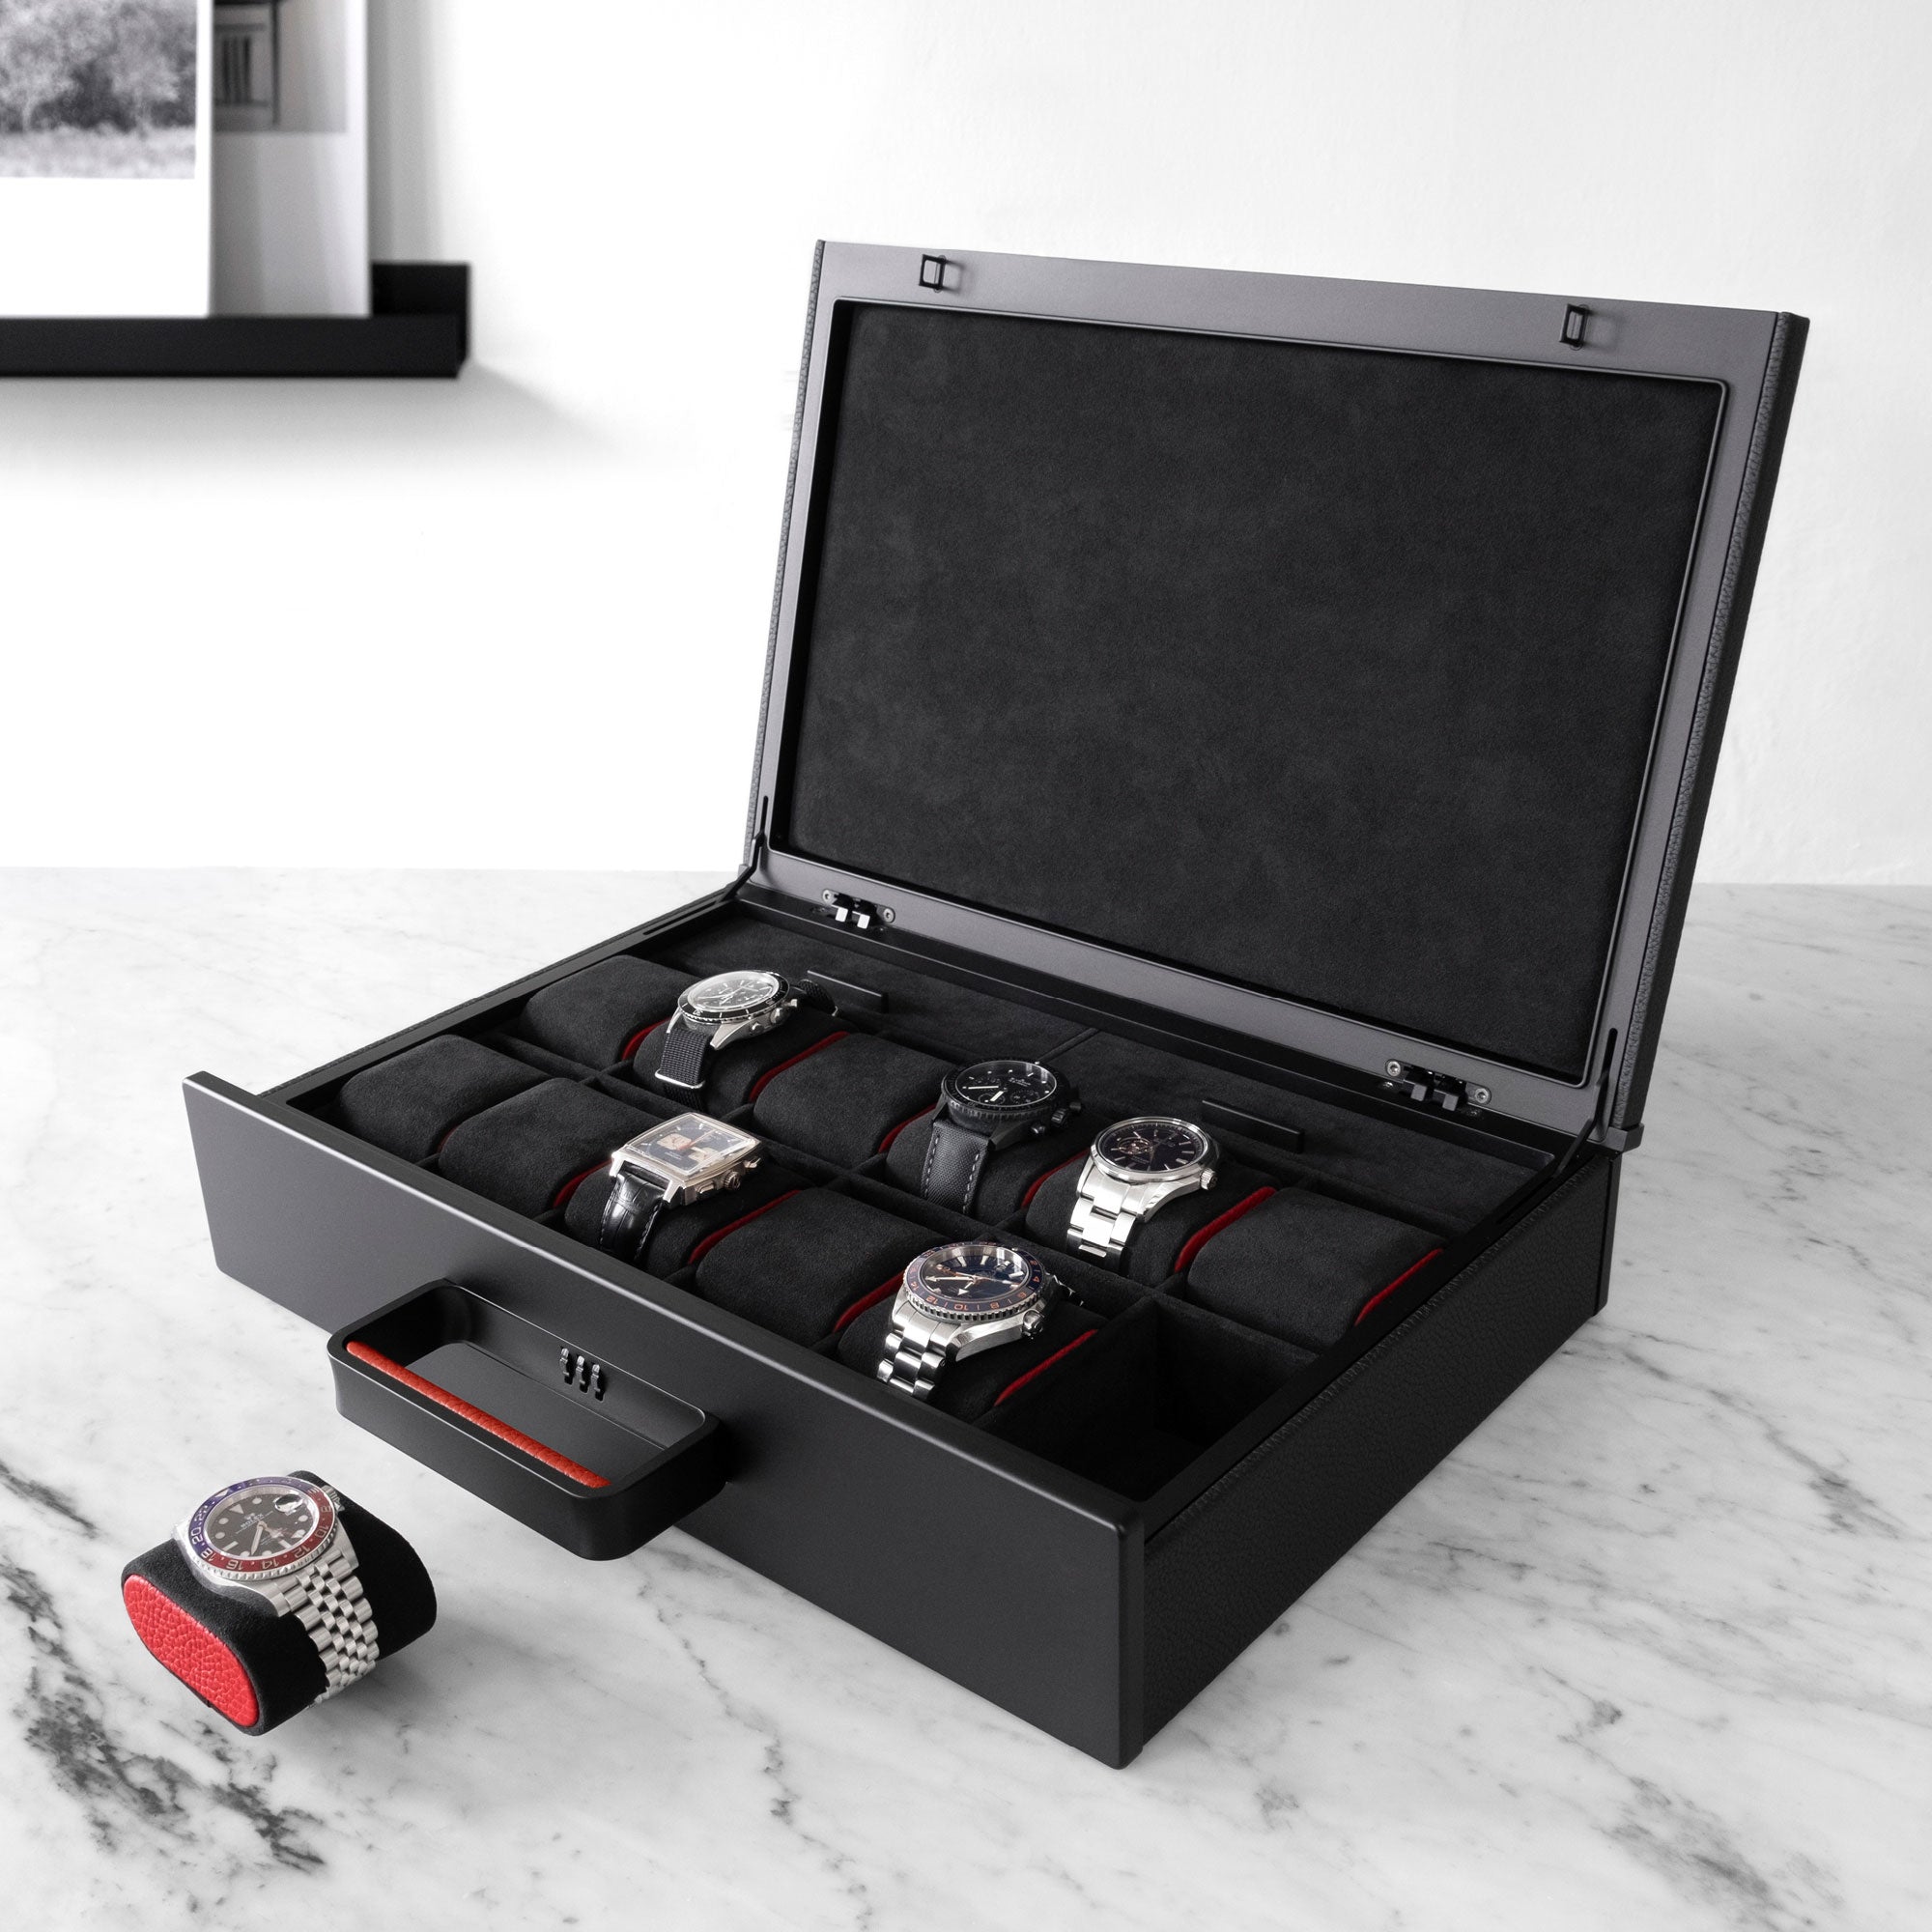 Designer watch briefcase made from black French leather, carbon fiber and anodized aluminum. Featuring bold red leather accents.